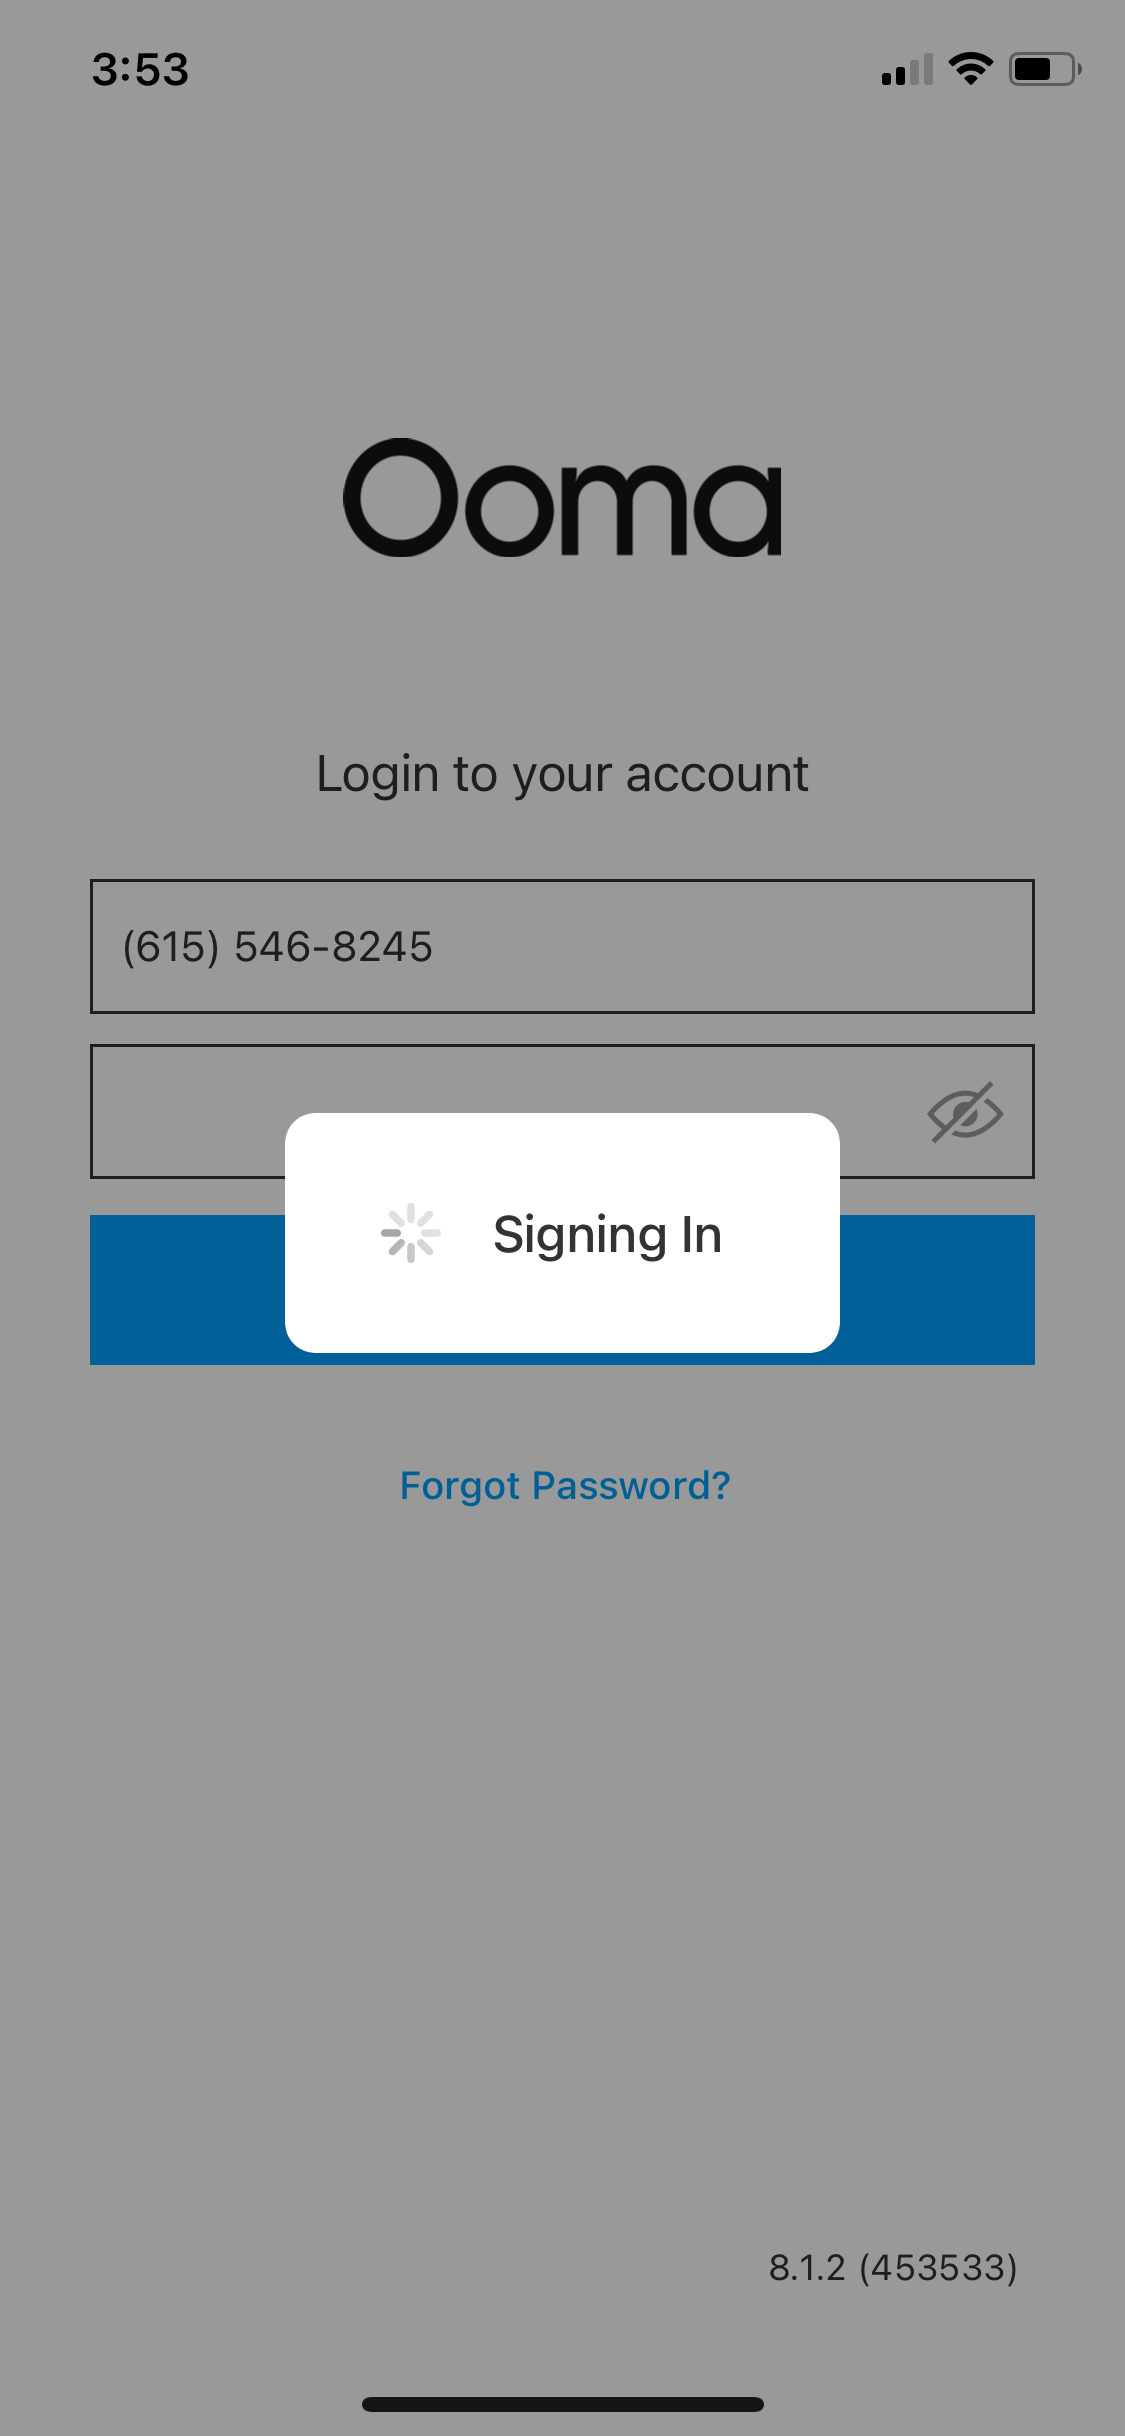 Screenshot of the sign-in page on Ooma